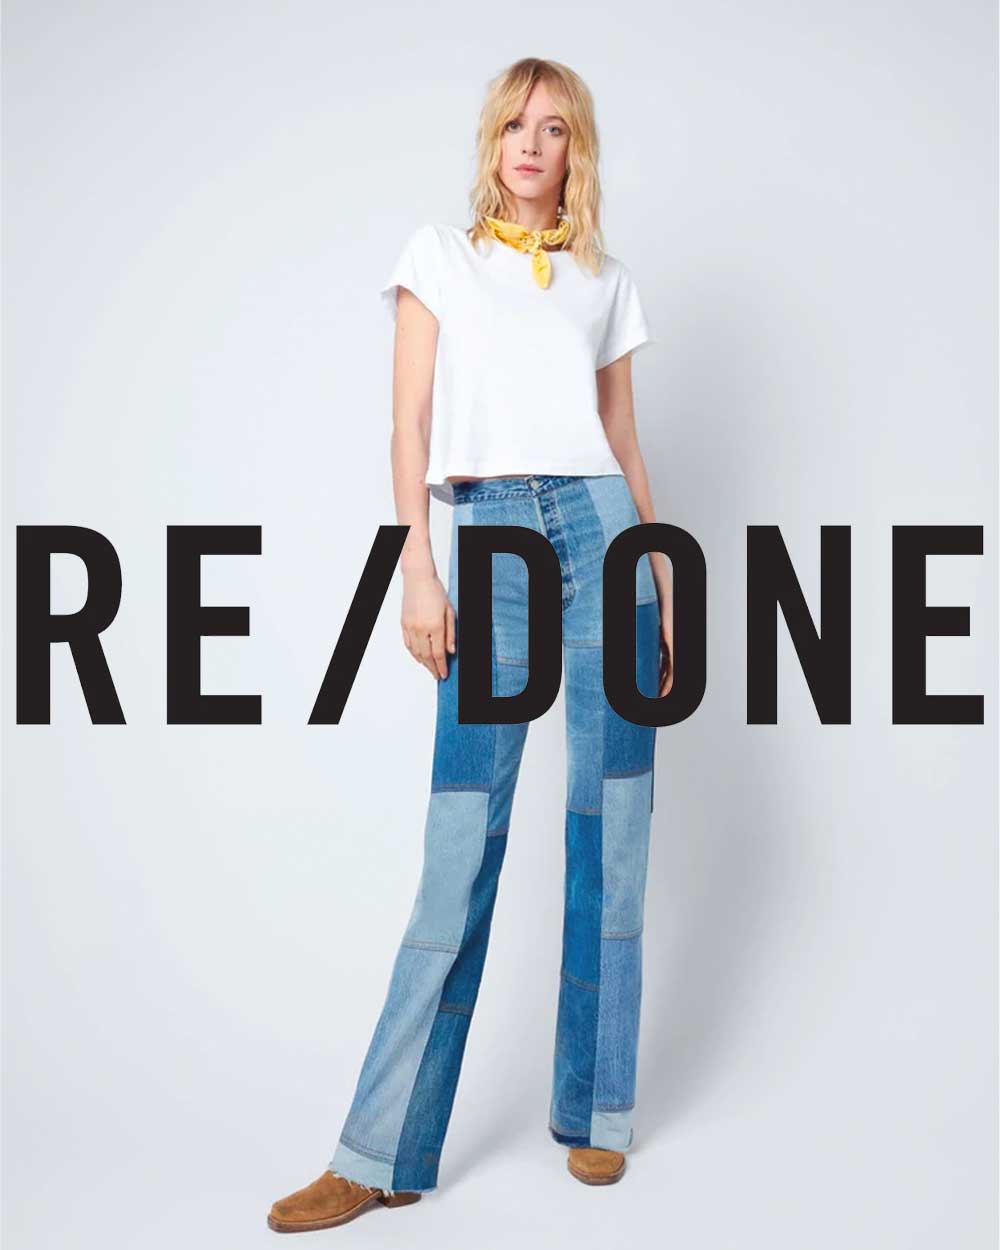 RE/DONE Upcycled Denim Clothing